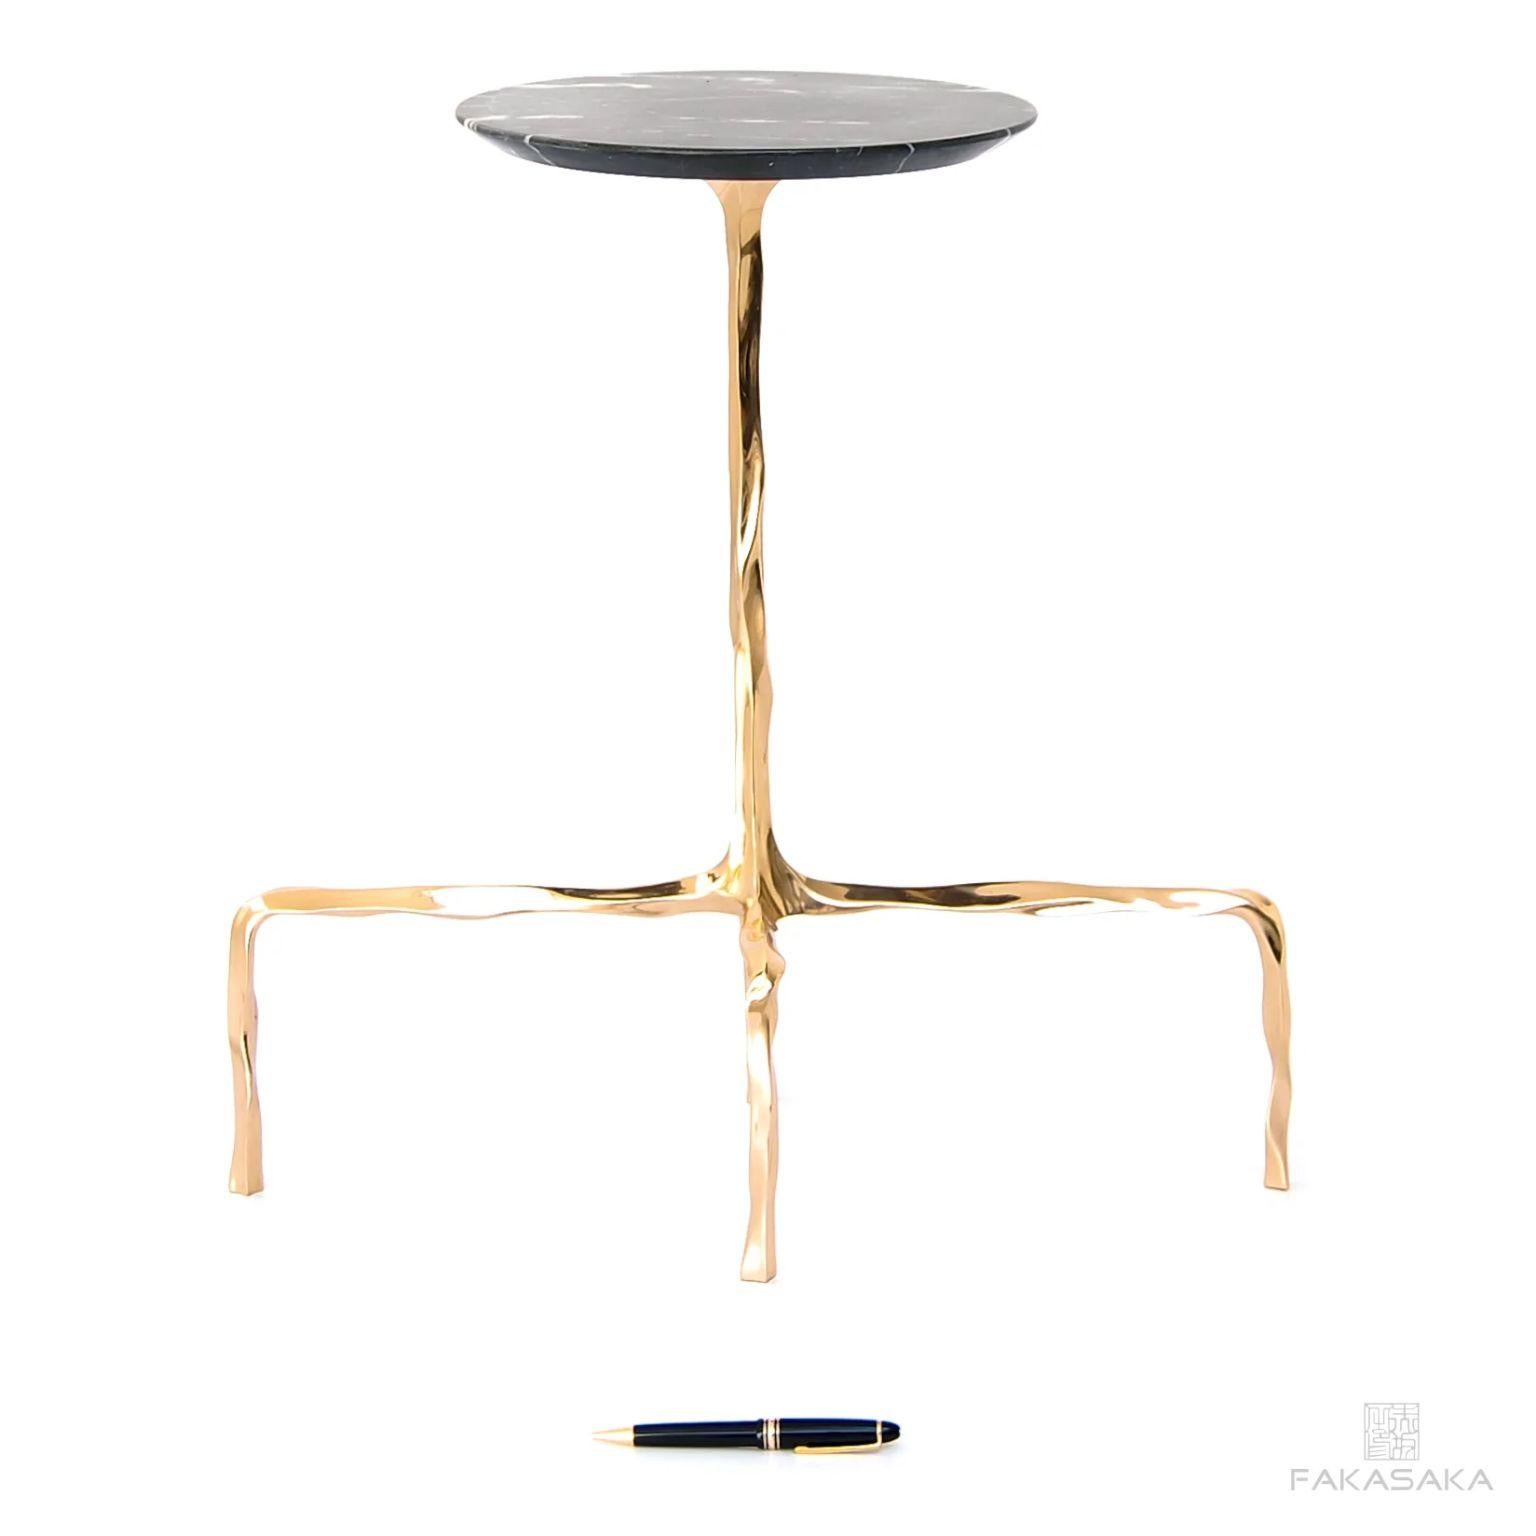 Other Presley Drink Table with Nero Marquina Marble Top by Fakasaka Design For Sale